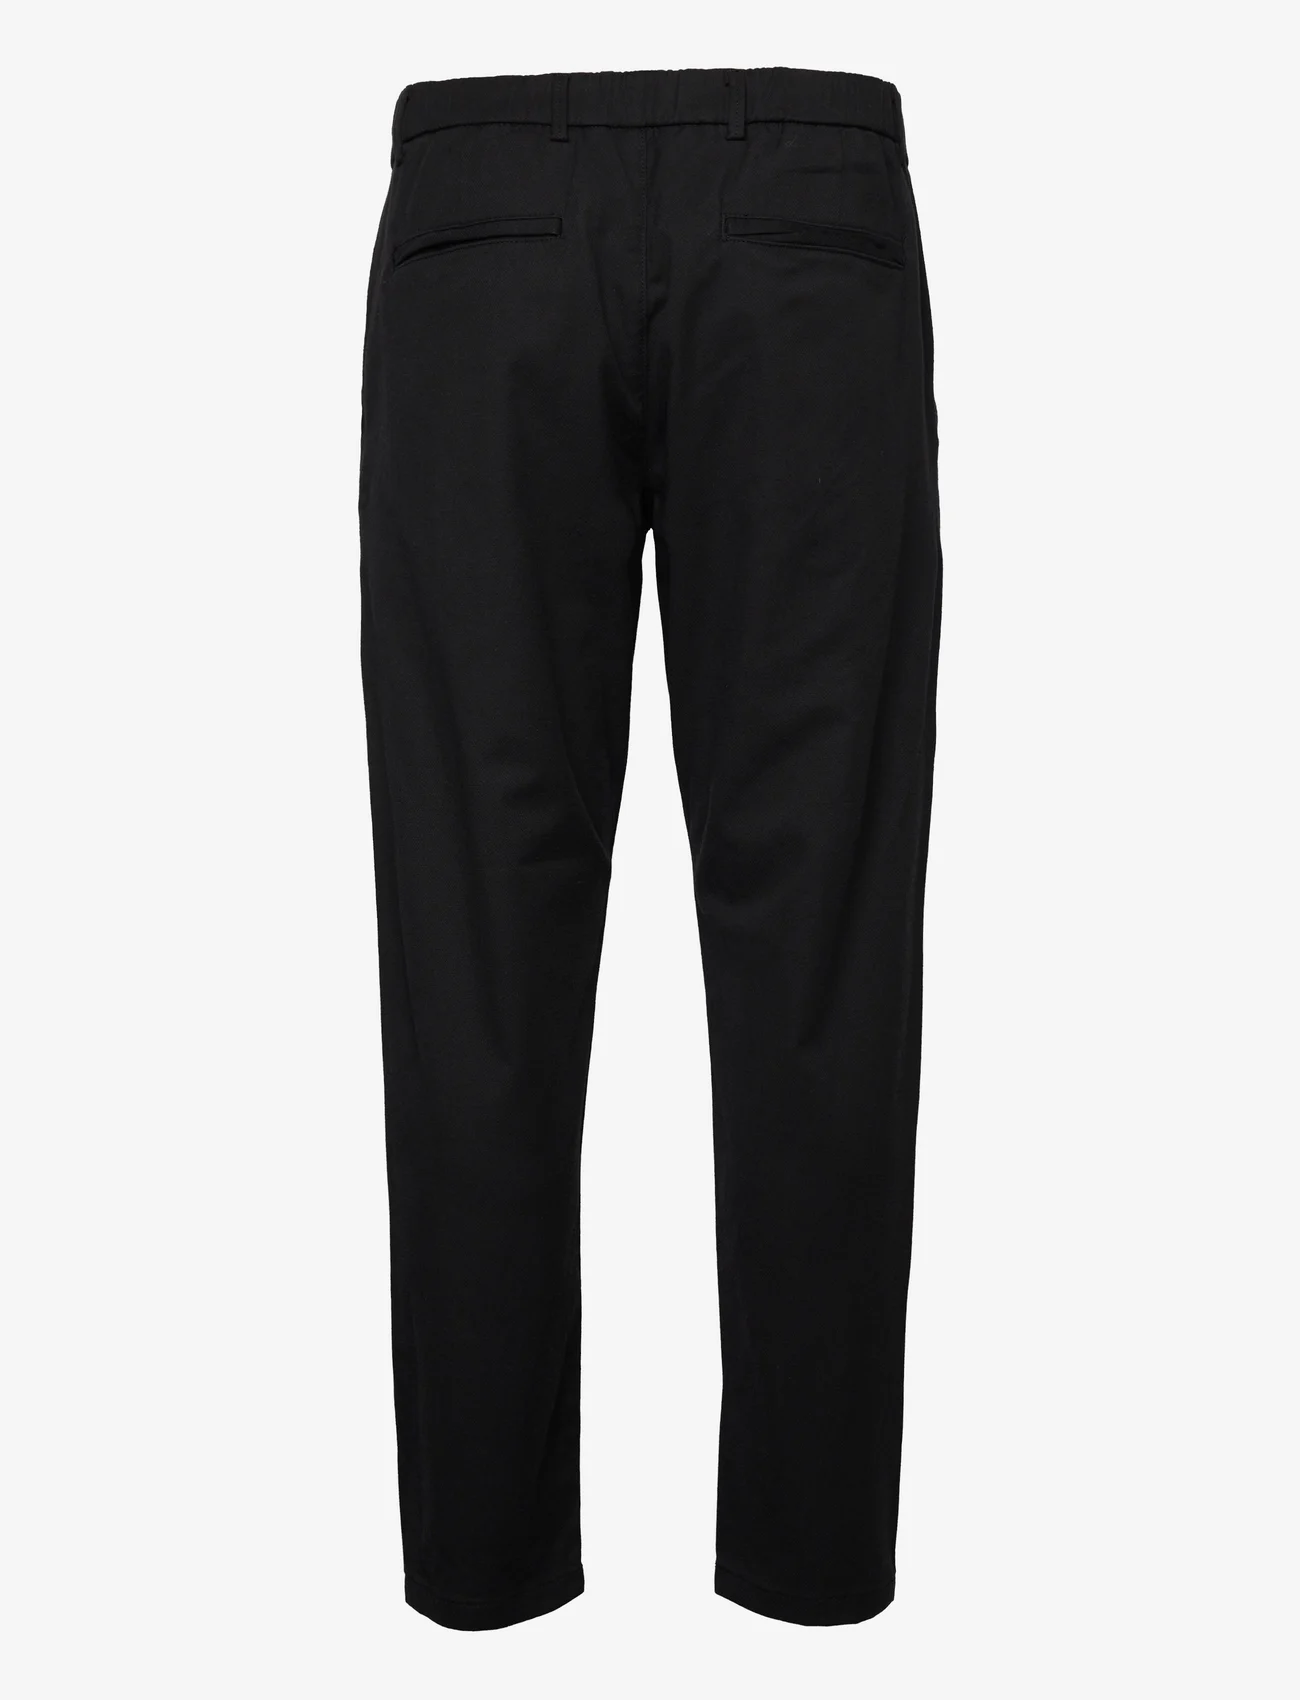 Selected Homme - SLHSLIMTAPERED-YORK PANTS - casual trousers - black - 1